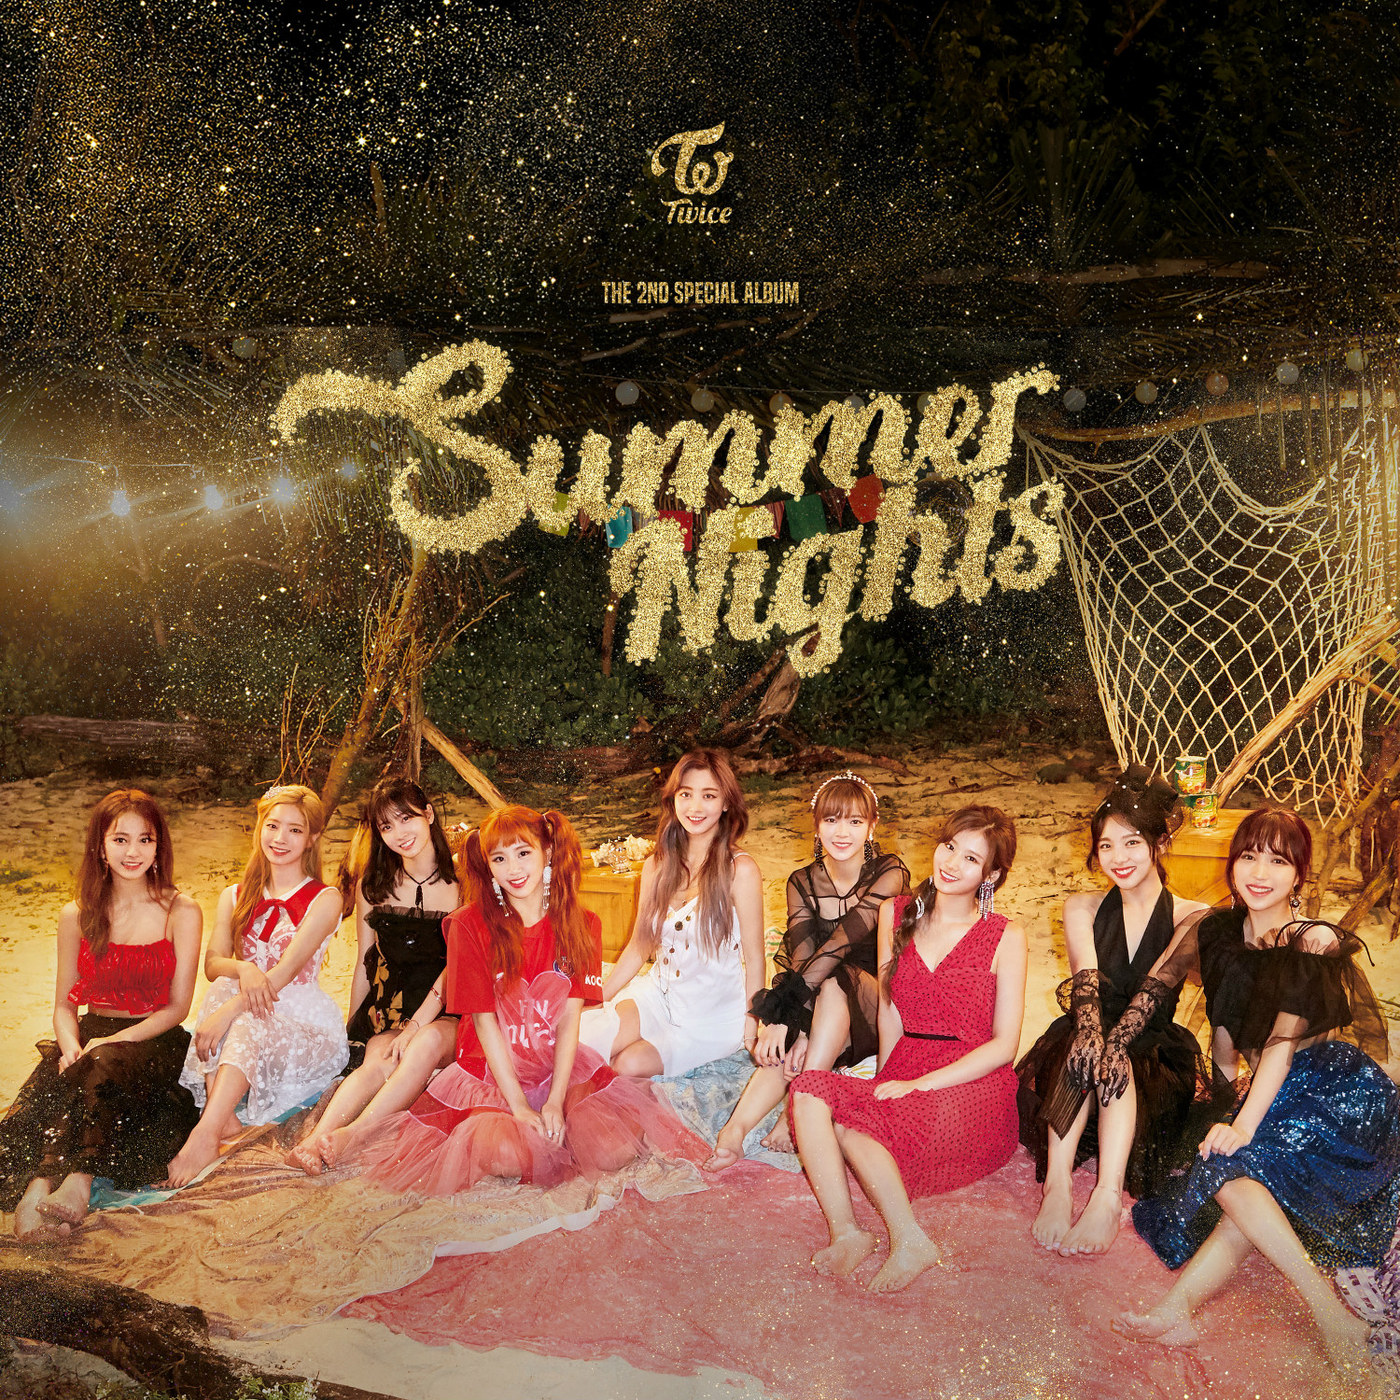 TWICE (TWICE) announced the title song Dance the Nightstand Lee Jin-hyuk (Dance The Night Away) for the special 2nd album India Summer Nightstand (Summer Nights) and the title song India Summer Queen.With this song, seven major soundtrack charts in Korea were All Kill and 9 consecutive popular home runs.Dance the Nightstand Lee Jin-hyuk was written by senior singer Wheesung and the combination of TWICE X Wheesung was concluded, and Wheesungs unique sensual lyrics, TWICEs fresh and youthful energy met and achieved special synergy.TWICE said on the 10th, I am really grateful to many fans including our ones who have always loved so much that I first came back in the summer.I also thank Mr. Wheesung for writing good lyrics. Its hot weather, but I hope you can have a cool summer with Dance the Nightstand Lee Jin-hyuk.I will work hard this summer. The new album India Summer Nightstand reached the top of the iTunes album charts in seven overseas regions including Hong Kong, Malaysia and the Philippines on the morning of the 10th.Dance the Nightstand Lee Jin-hyuk ranked first on the iTunes Songchart in six overseas regions including Hong Kong, Thailand and Singapore on the morning of the 10th.In Japan, new songs from the new song India Summer Nightstand such as Dance the Nightstand Lee Jin-hyuk, Chillex (CHILLAX), Shot through the heart soundtrack showed off their chart-line power by taking first, second and third place on the top 100 charts of local line music ...The music video Dance the Nightstand Lee Jin-hyuk released with soundtrack at 6 pm on the 9th exceeded 15.88 million views on YouTube in 12 hours, and the previous works Heart Shaker and What Orange Is the New Black Love?(What is Love?) is setting its own record, speeding up the trend of views. From its debut song, What Orange Is the New Black Love?Dance the Nightstand Lee Jin-hyuk, the first India Summer song, has been on the verge of establishing a new record of 9 consecutive 100 million views, while it has surpassed 100 million views for 8 consecutive years until MV.TWICEs new song Dance the Nightstand Lee Jin-hyuk is an uptempo pop song expressing the youth of nine members living with special happiness.It brings out the bright and healthy energy of TWICE, and it gives a cool and refreshing feeling to make the summer heat bud go away.TWICE has been conducting Naver Special V LIVE at 8 pm on the 9th and communicating with fans in real time to commemorate the release of the new album India Summer Nightstand and the new song Dance the Nightstand Lee Jin-hyuk.Through this broadcast, TWICE showed Dance the Nightstand Lee Jin-hyuk choreography in the background of a set that created a romantic atmosphere of the midsummer night beach and expressed gratitude for the steady love of fans.